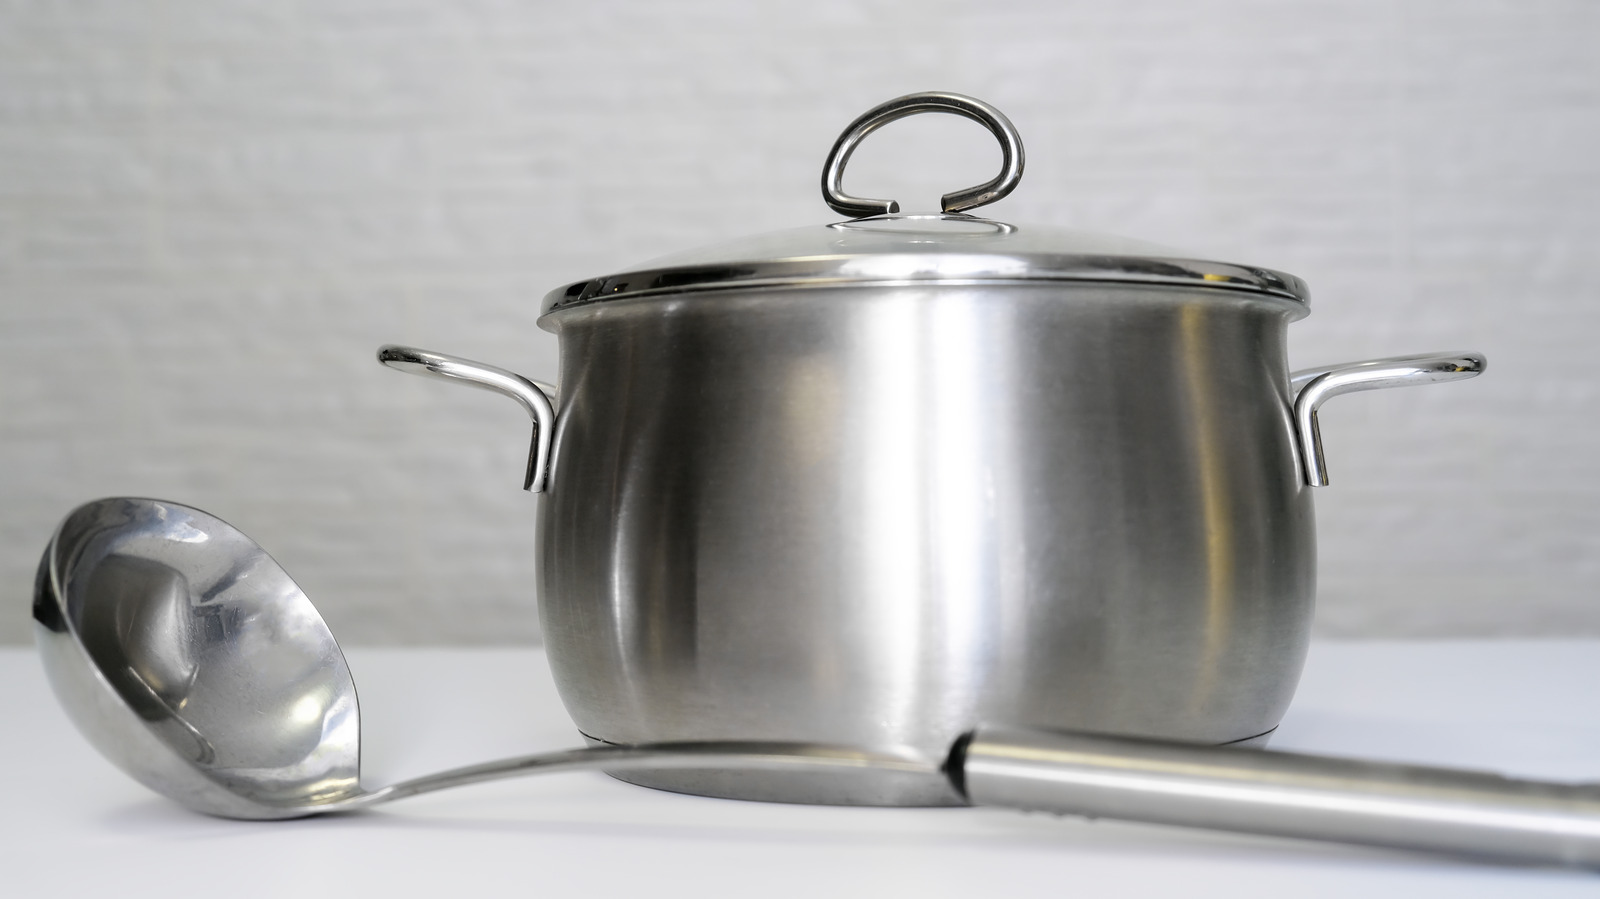 https://www.tastingtable.com/img/gallery/the-absolute-best-uses-for-your-stockpot/l-intro-1651761227.jpg